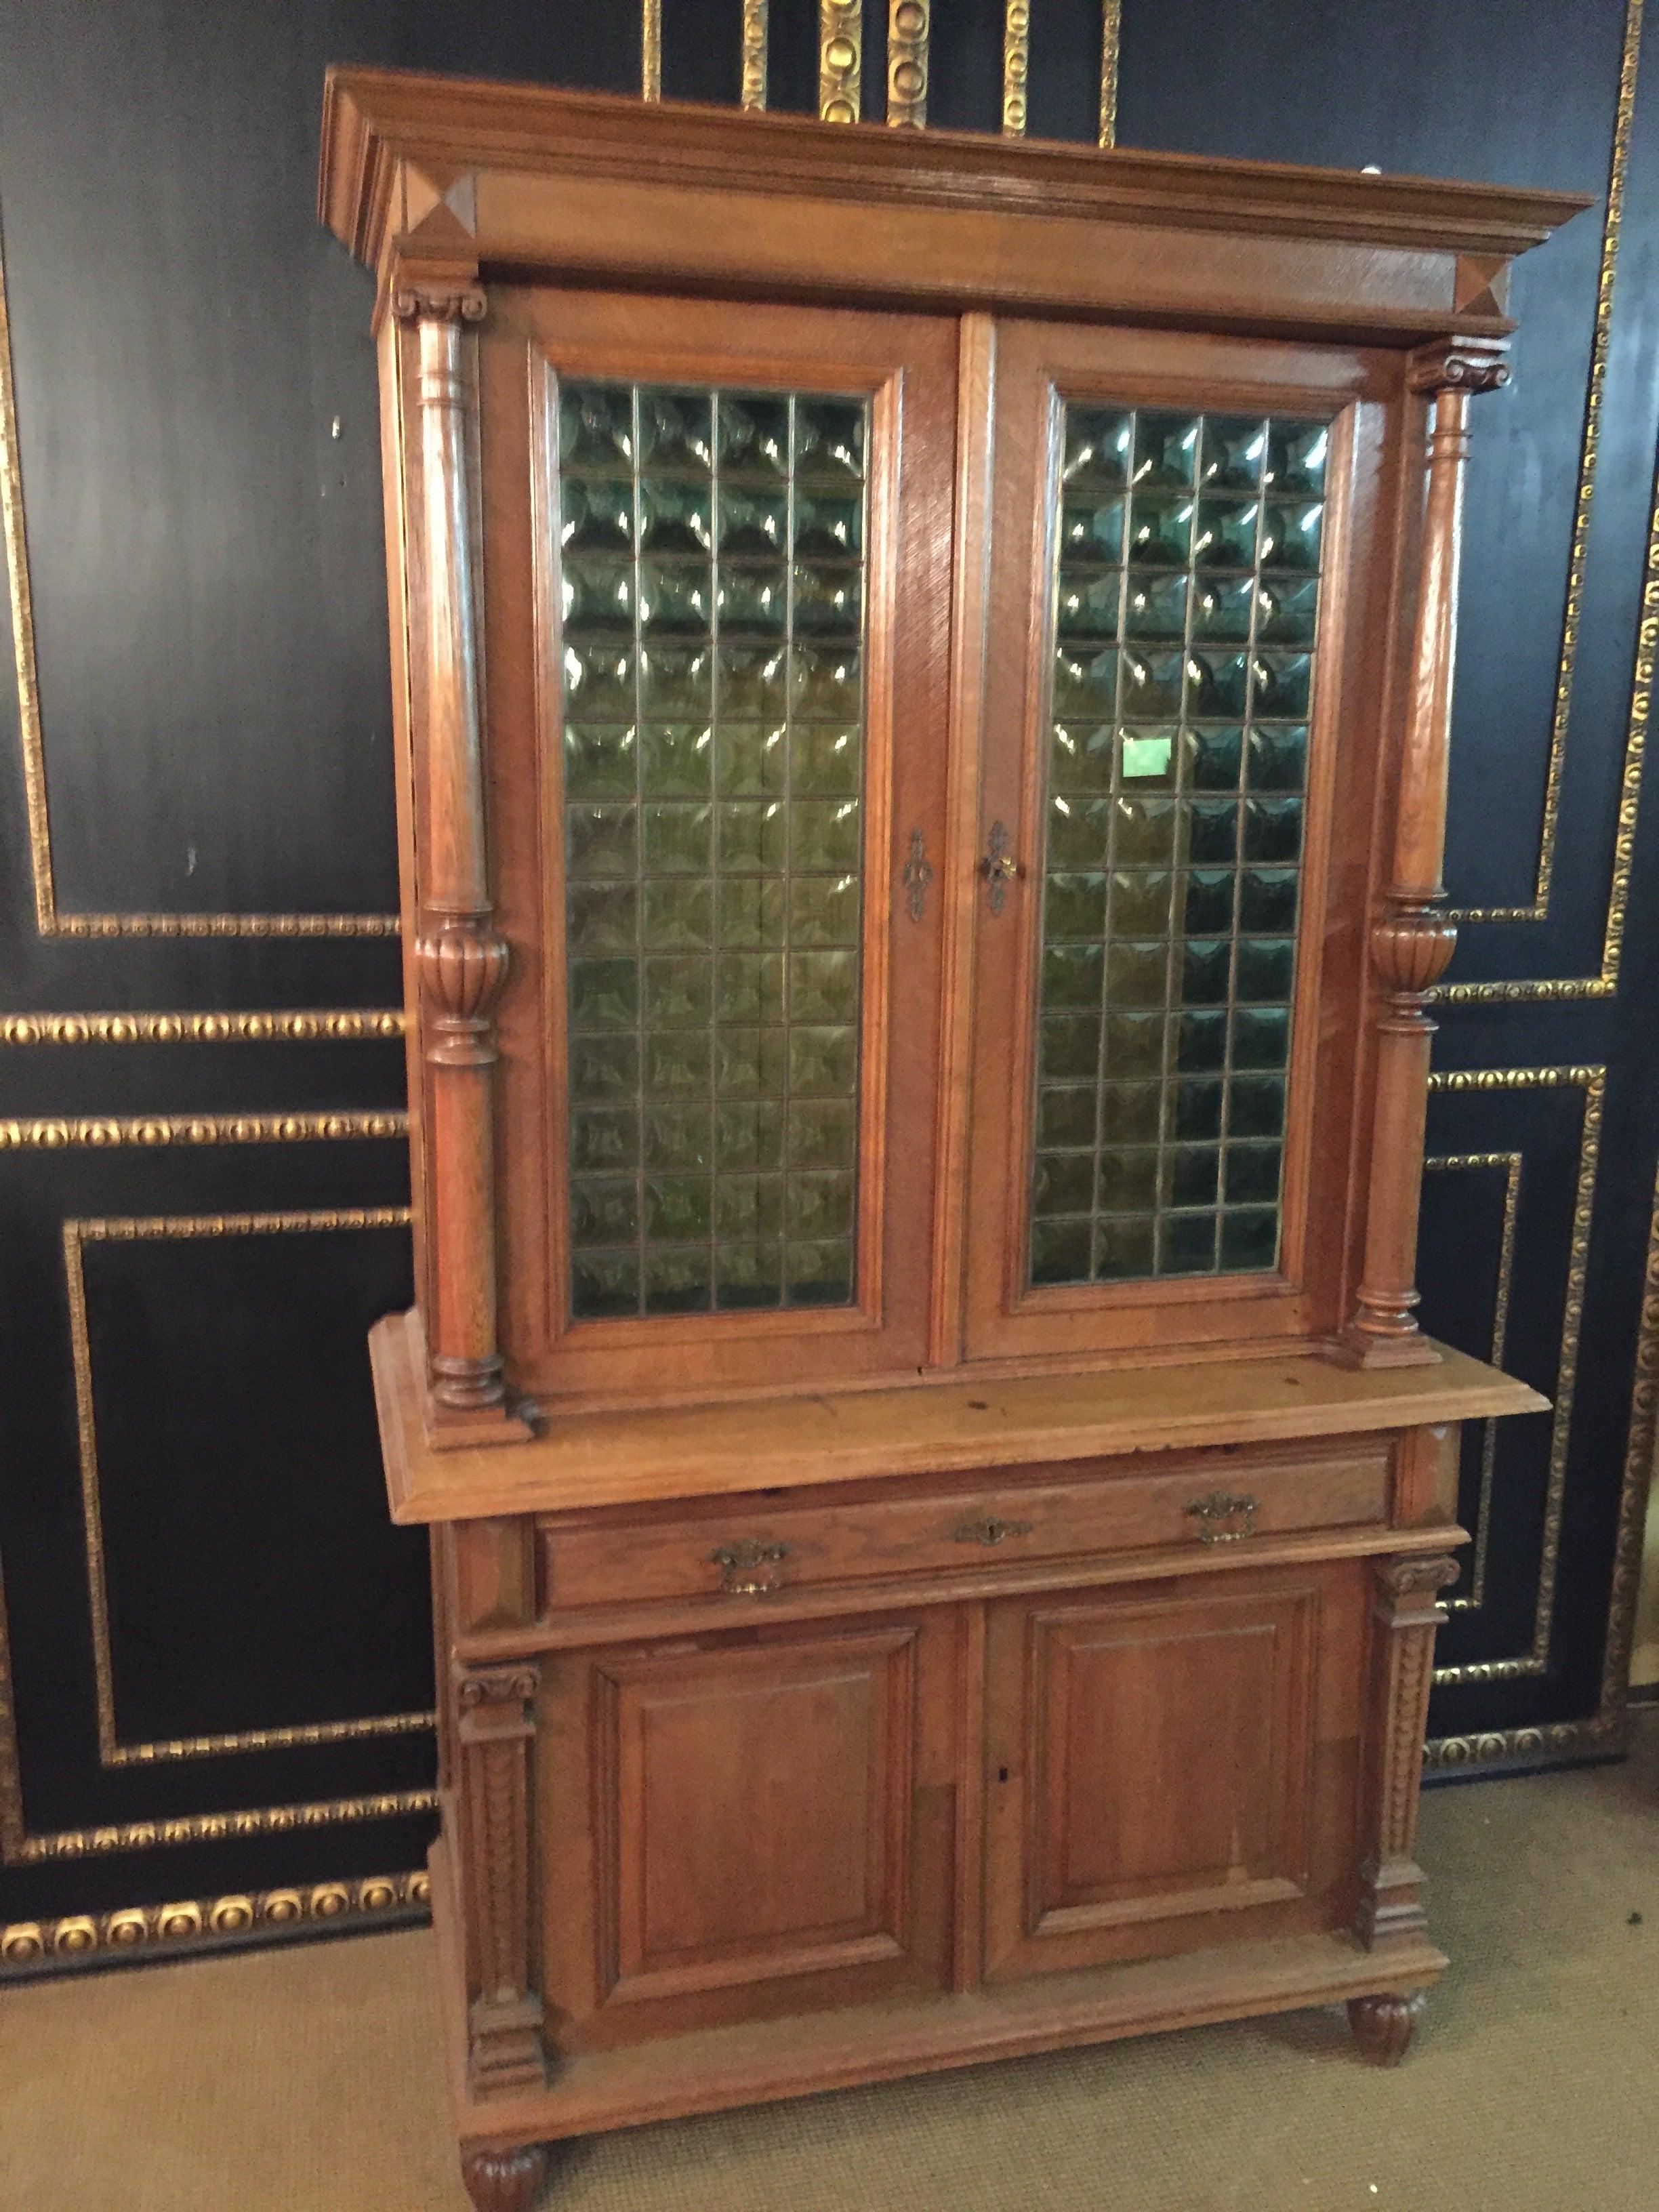 Massive oak manufactured circa 1900 impresses among other things by its carved front, the great green glasses, one glass pane is unfortunately broken
right and left columns.


The cabinet is in good original condition with age-related signs of